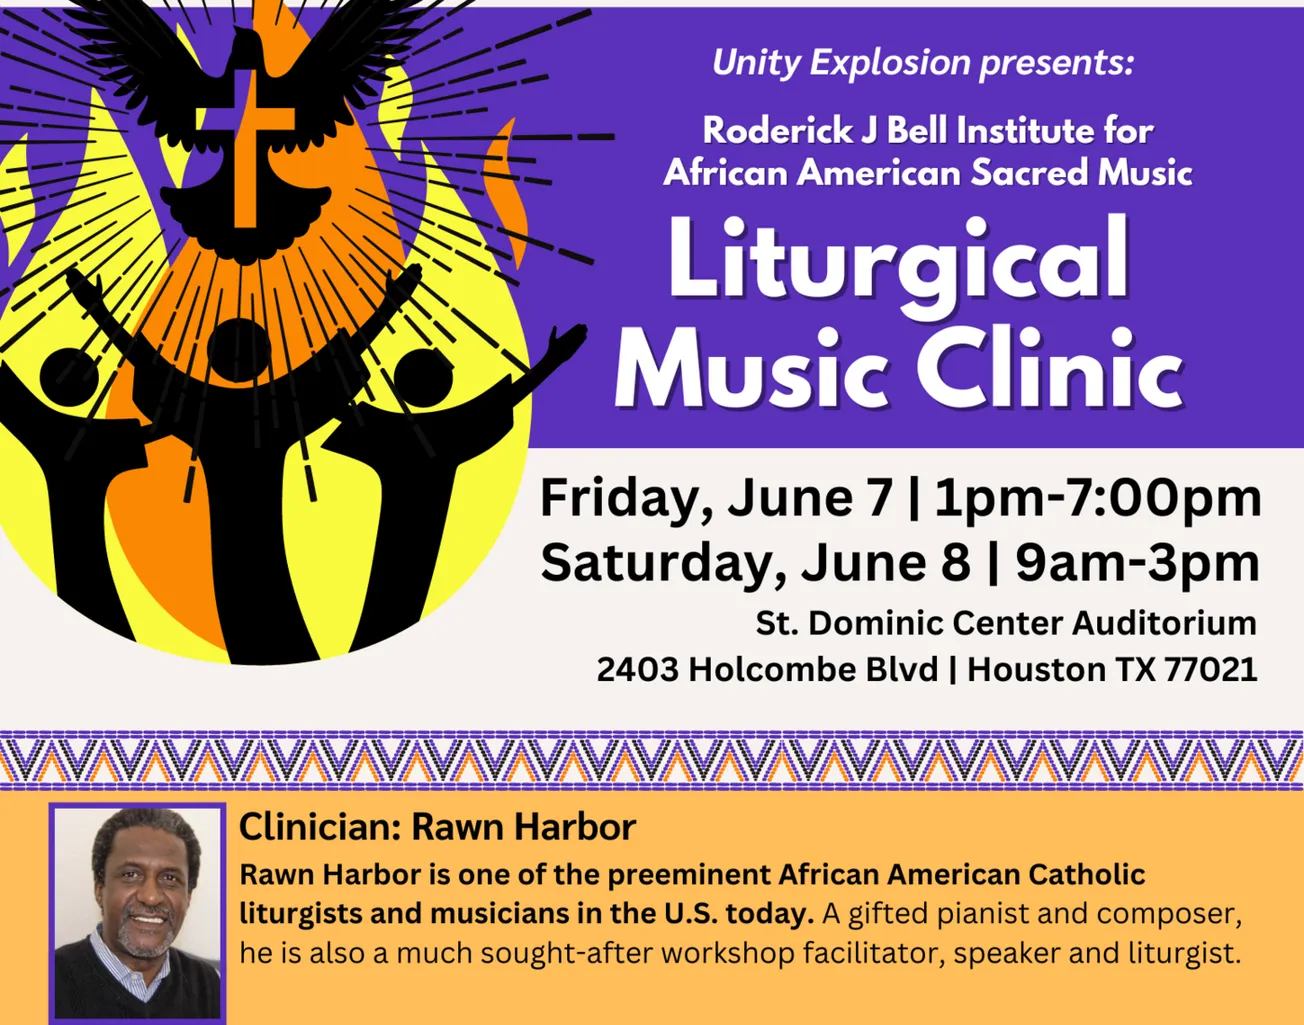 Music clinic with Rawn Harbor set for June 7-8 in Houston